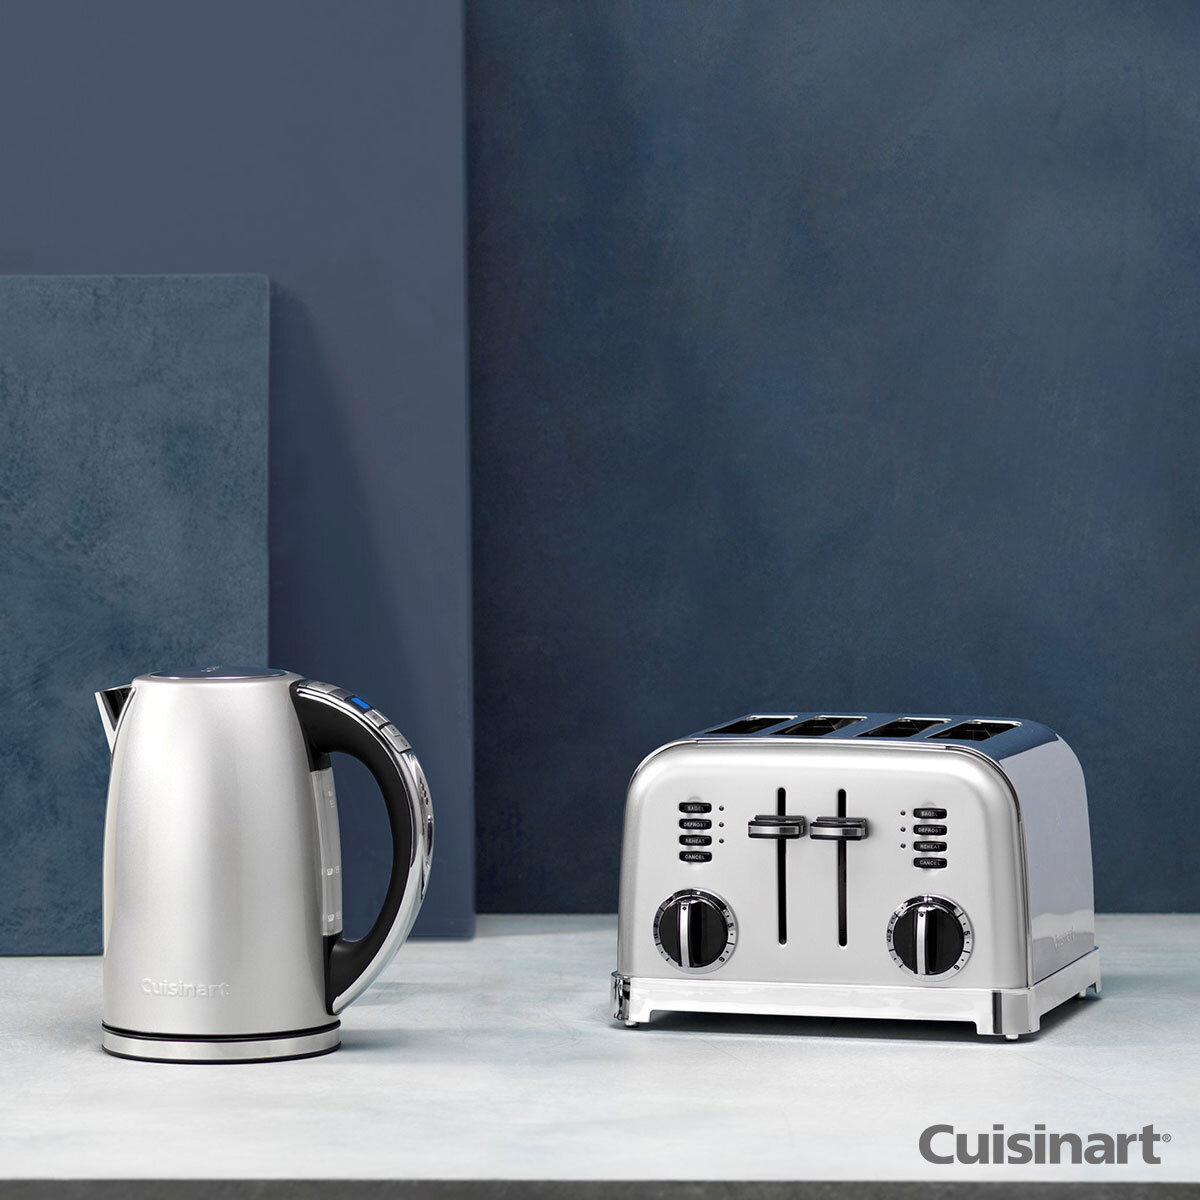 Lifestyle image of Cuisinart Kettle and Toaster set